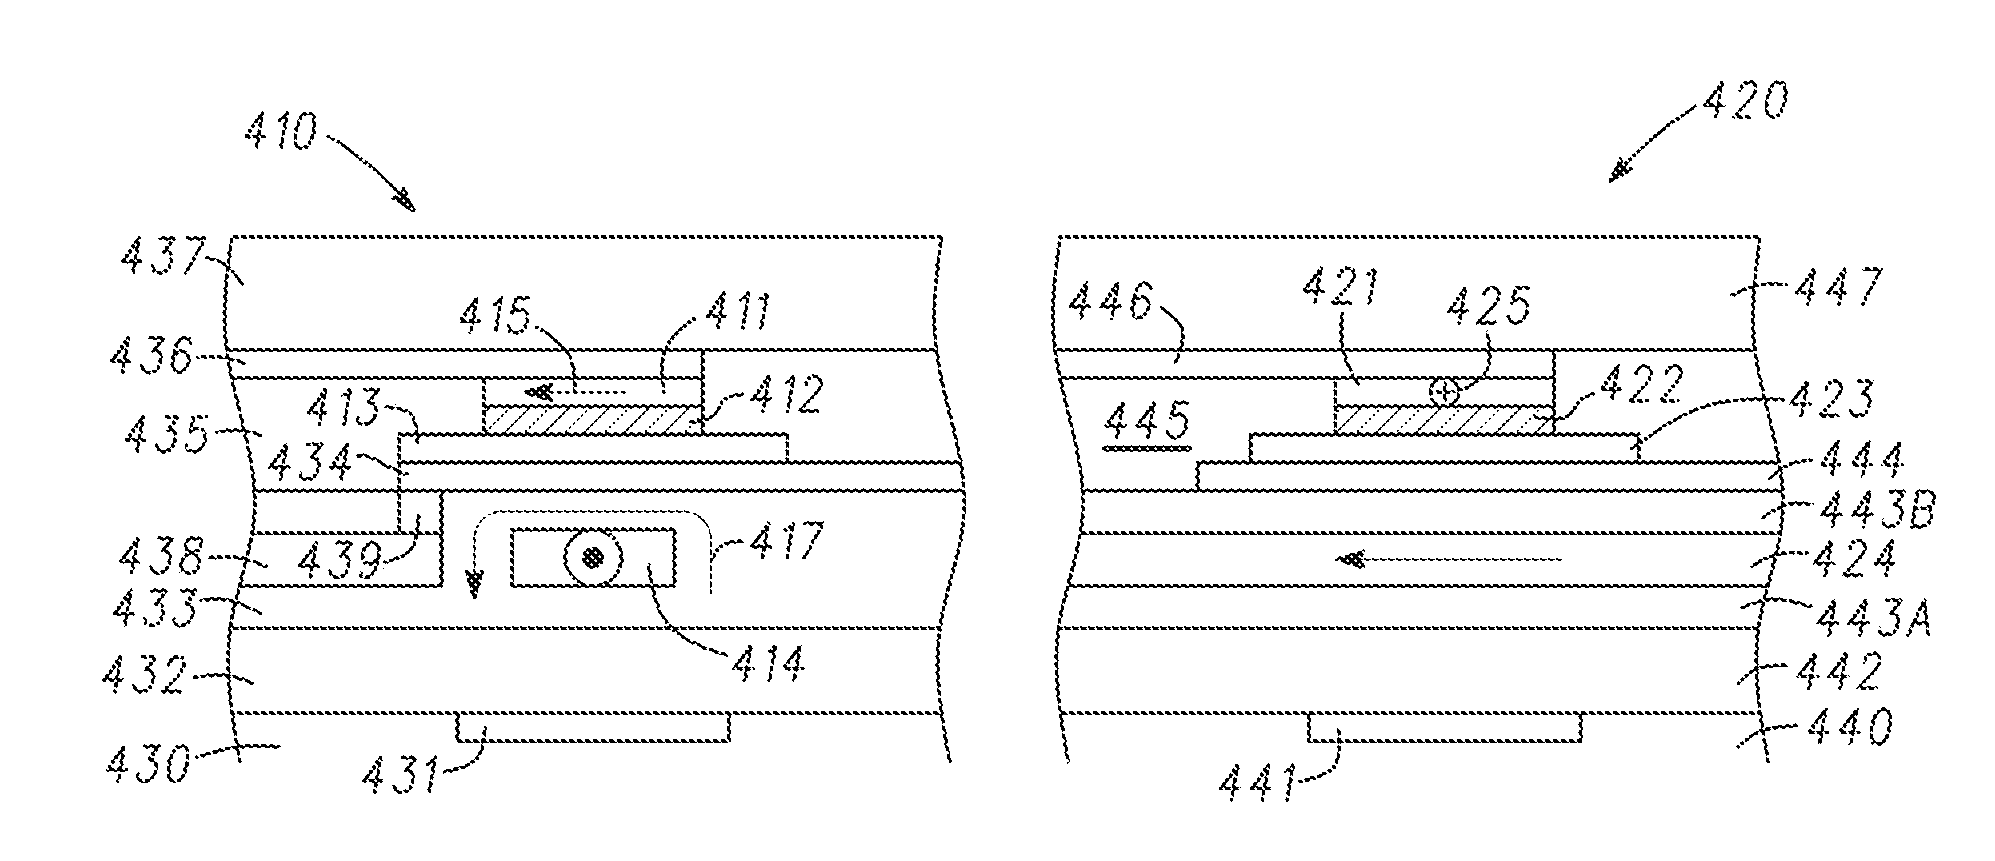 Fabrication process and layout for magnetic sensor arrays